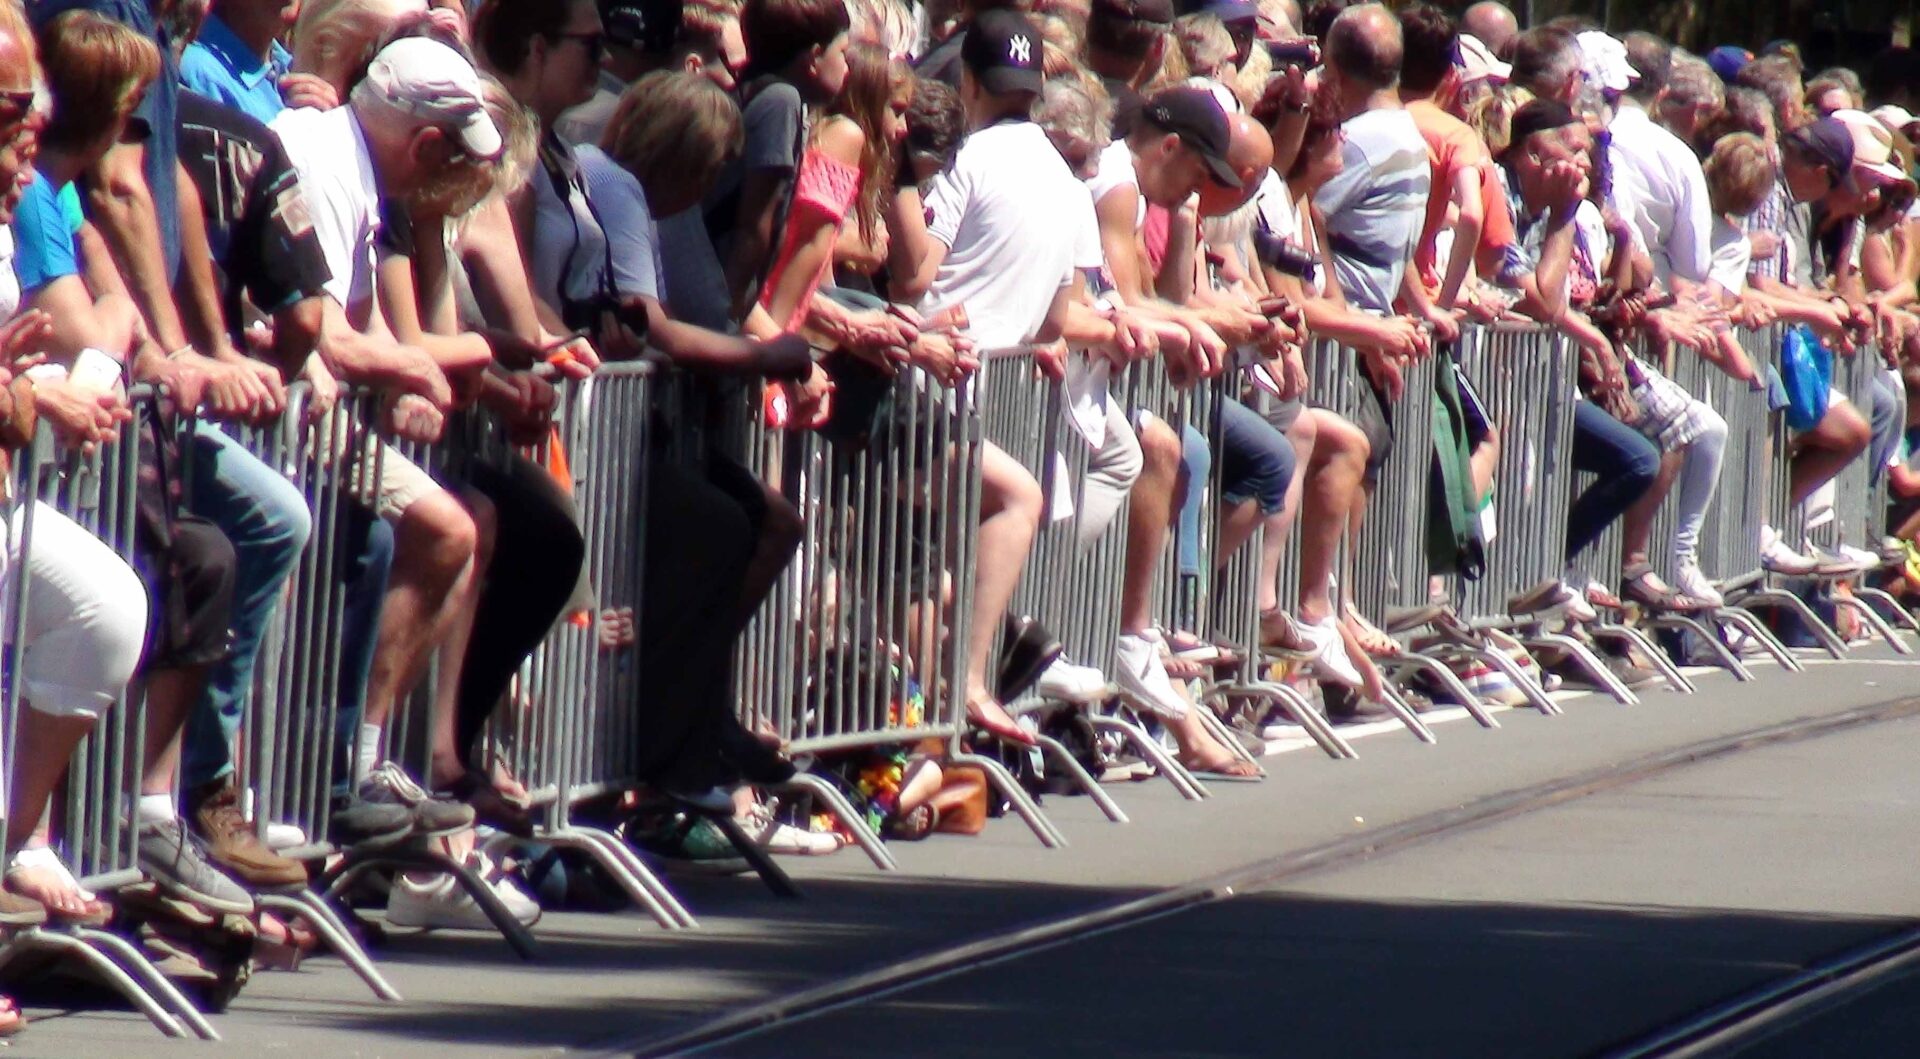 A crowd of people sitting on top of skateboards.